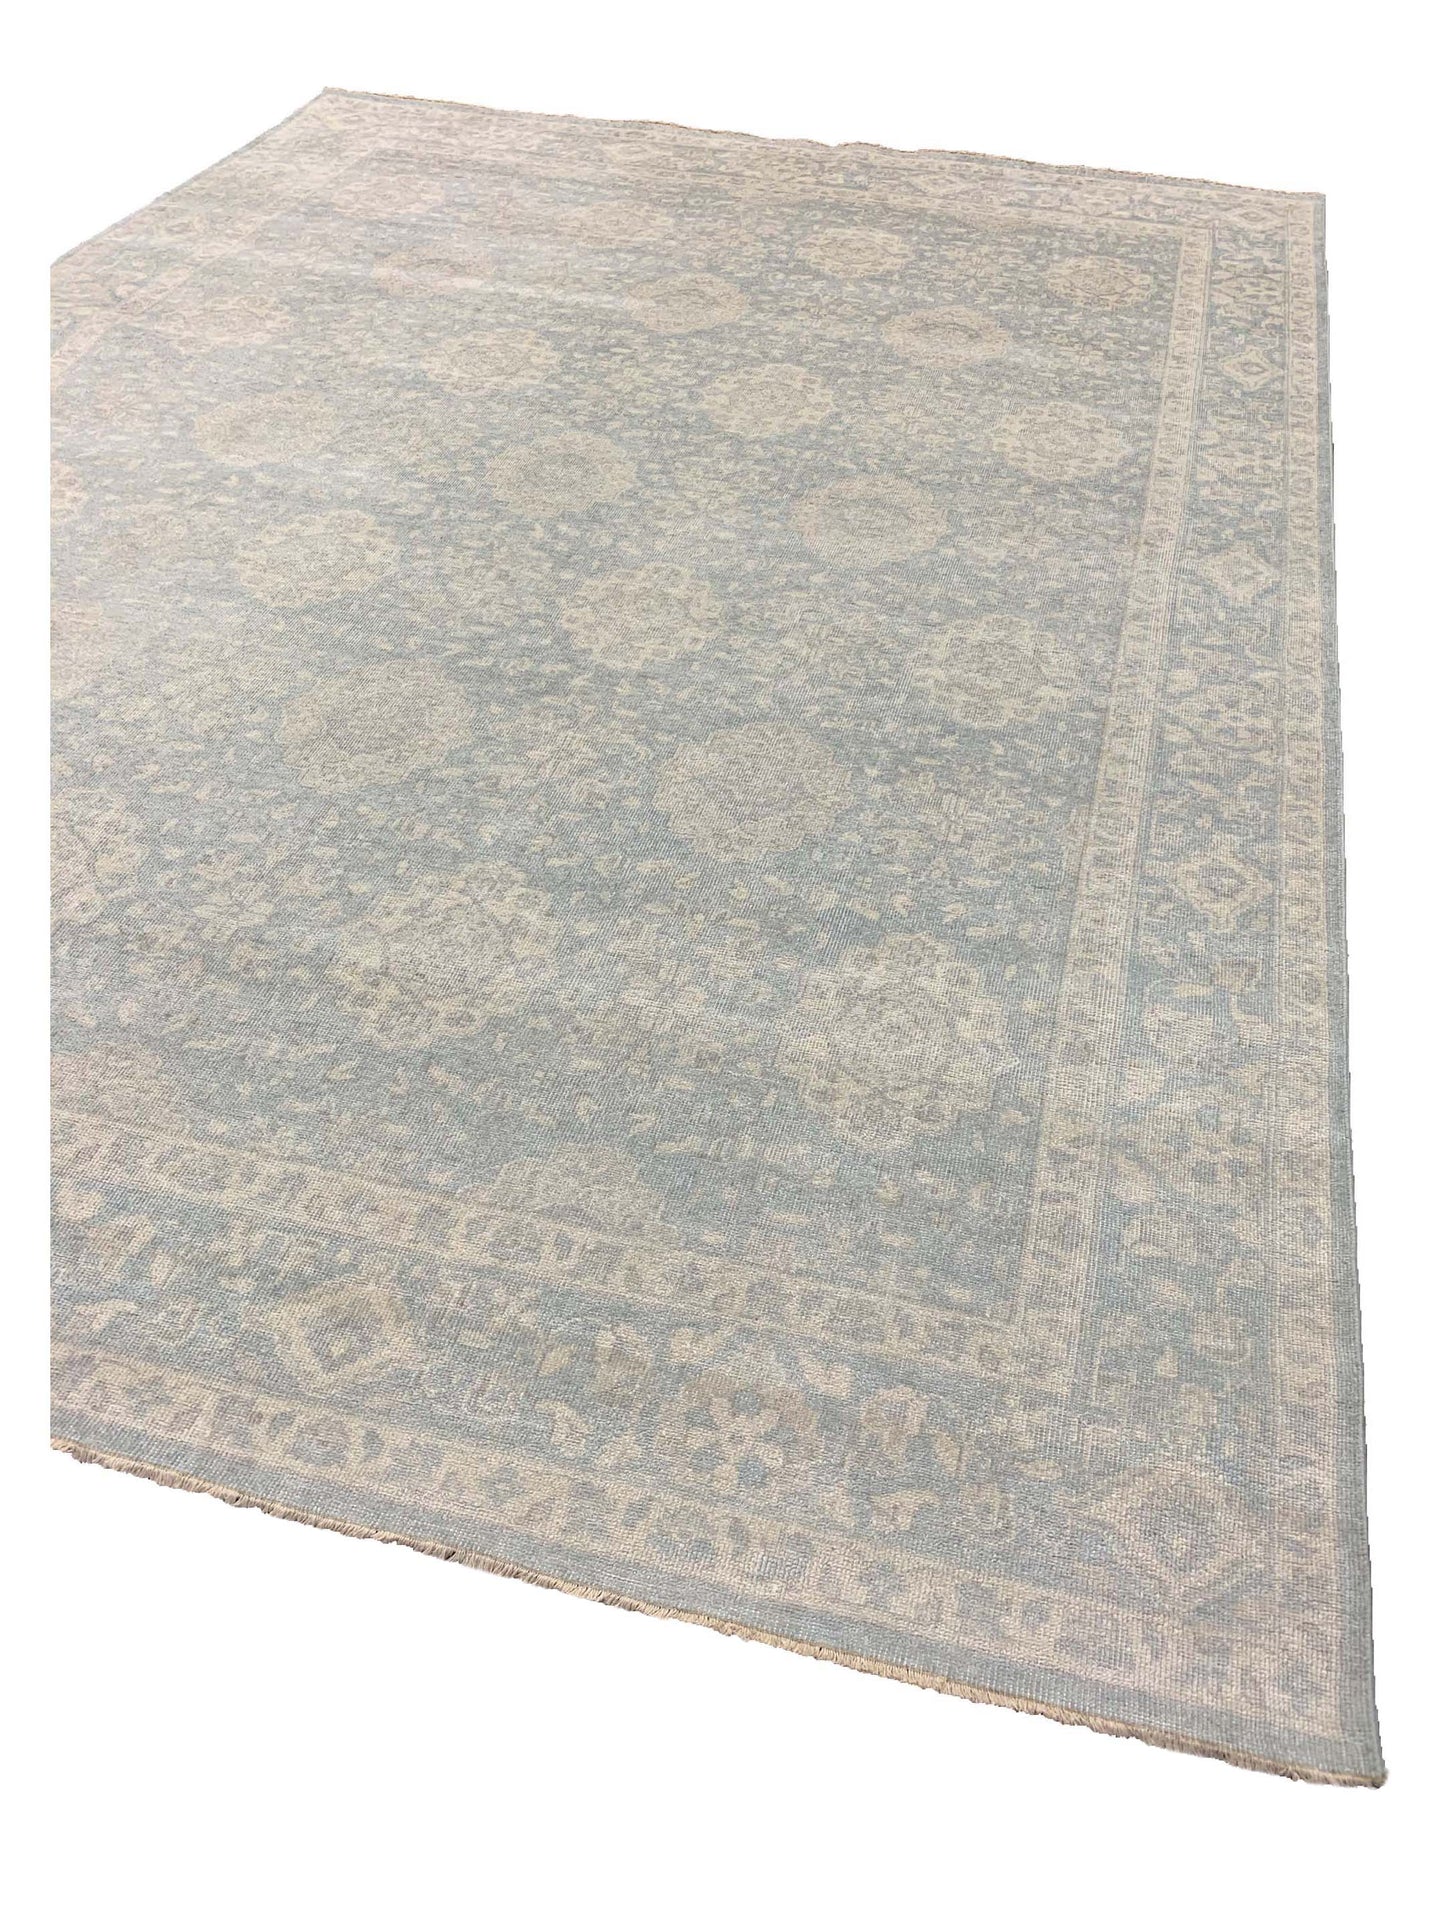 Artisan Hilary  Lt.Blue  Traditional Knotted Rug